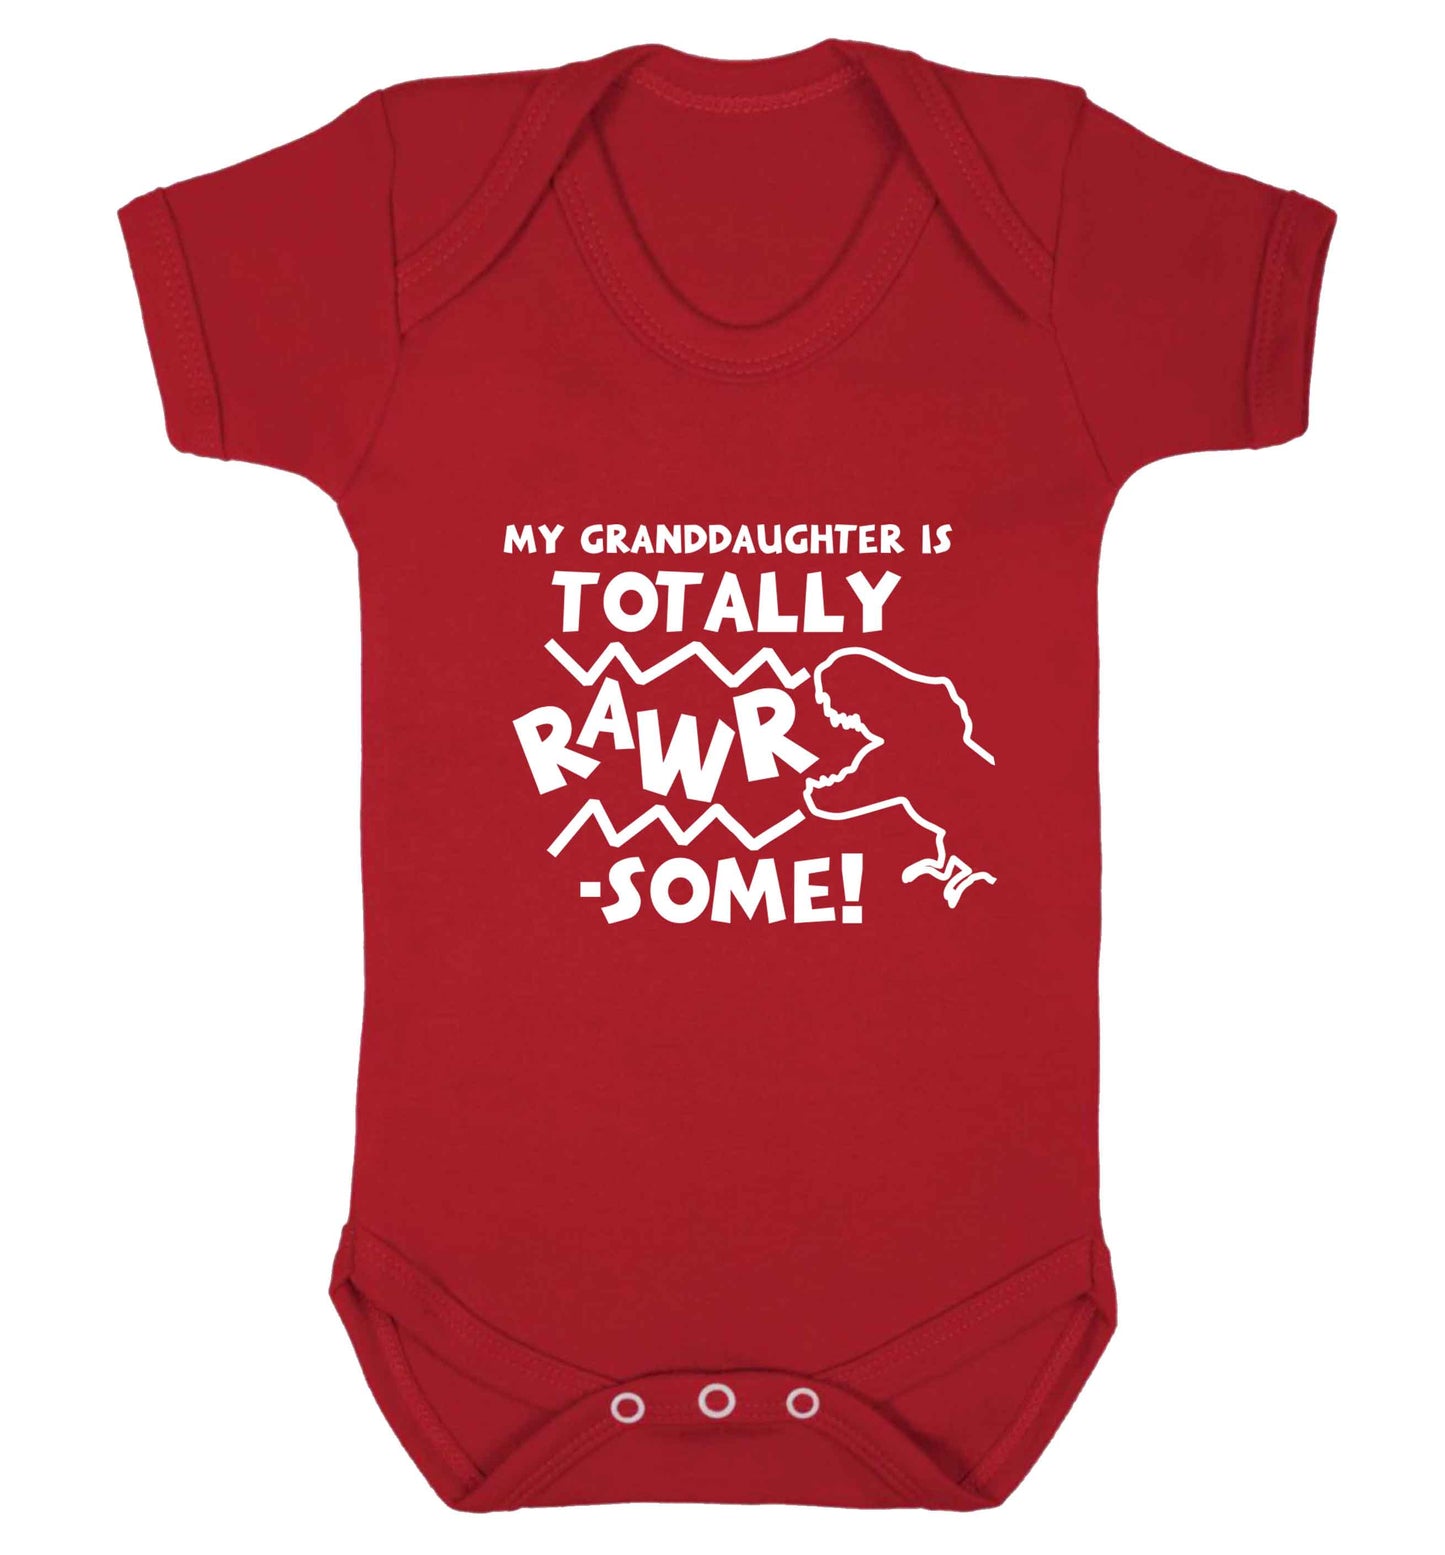 My granddaughter is totally rawrsome baby vest red 18-24 months